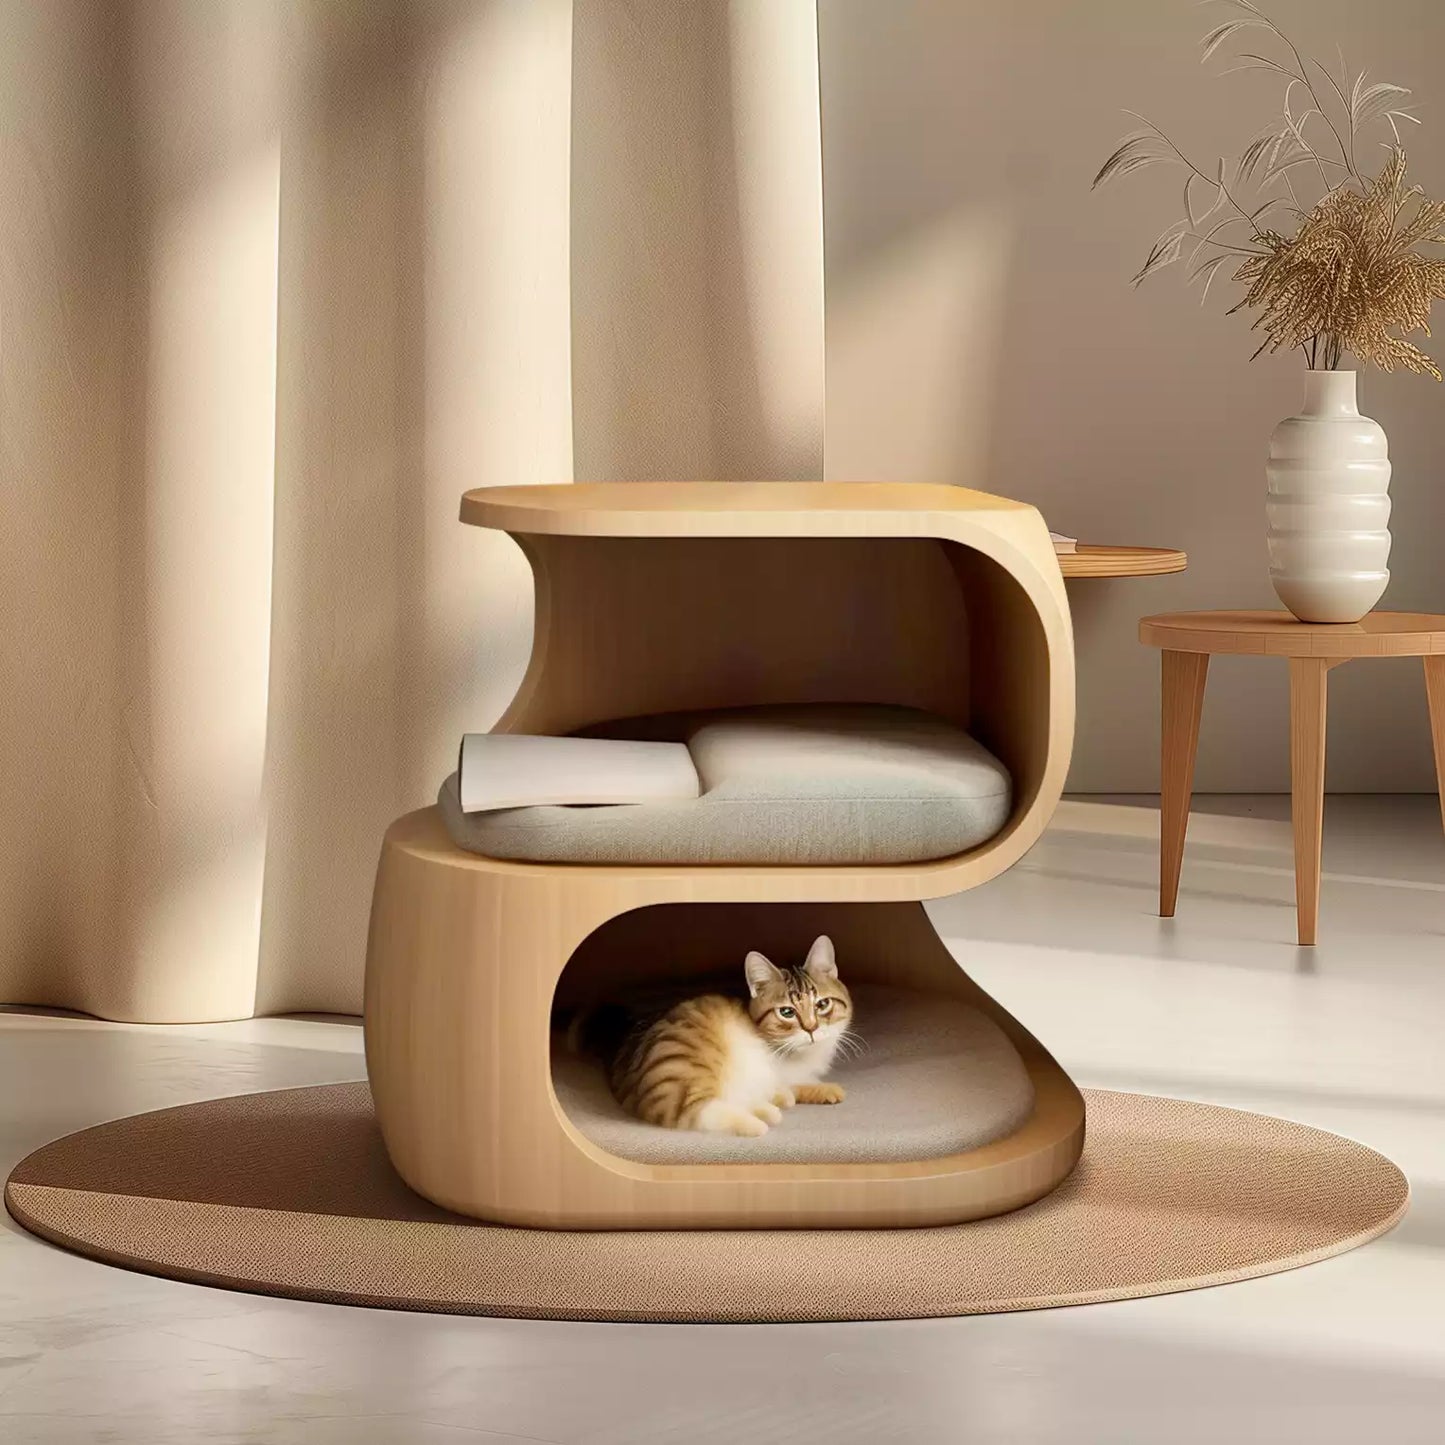 Create 3D-Printed Cat Bunk Beds, Custom, Stylish Pet Furniture for Small Cats and Kittens